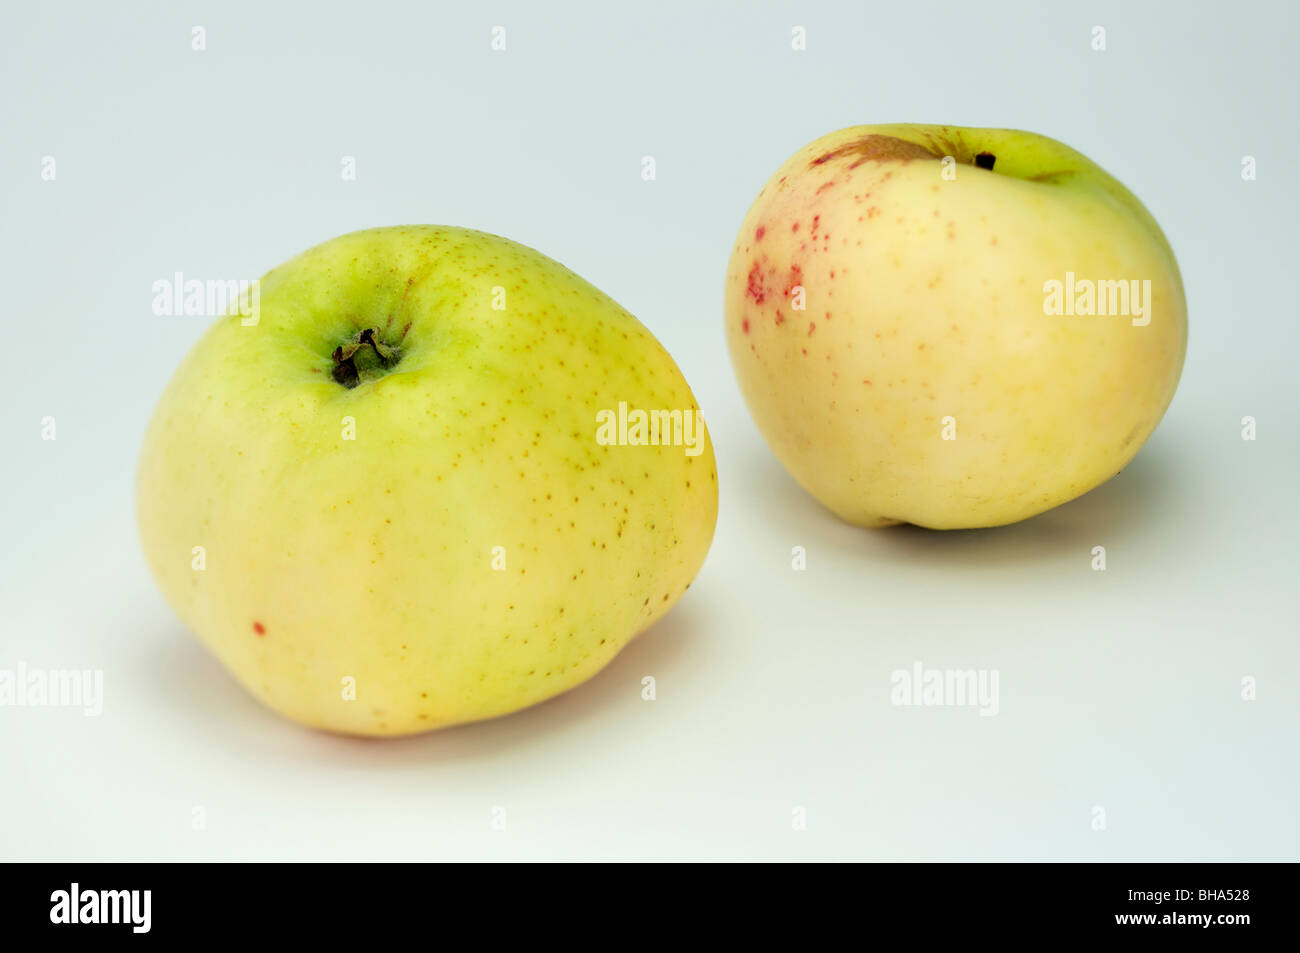 Domestic Apple (Malus domestica), variety: Cludius Herbstapfel, two apples, studio picture. Stock Photo